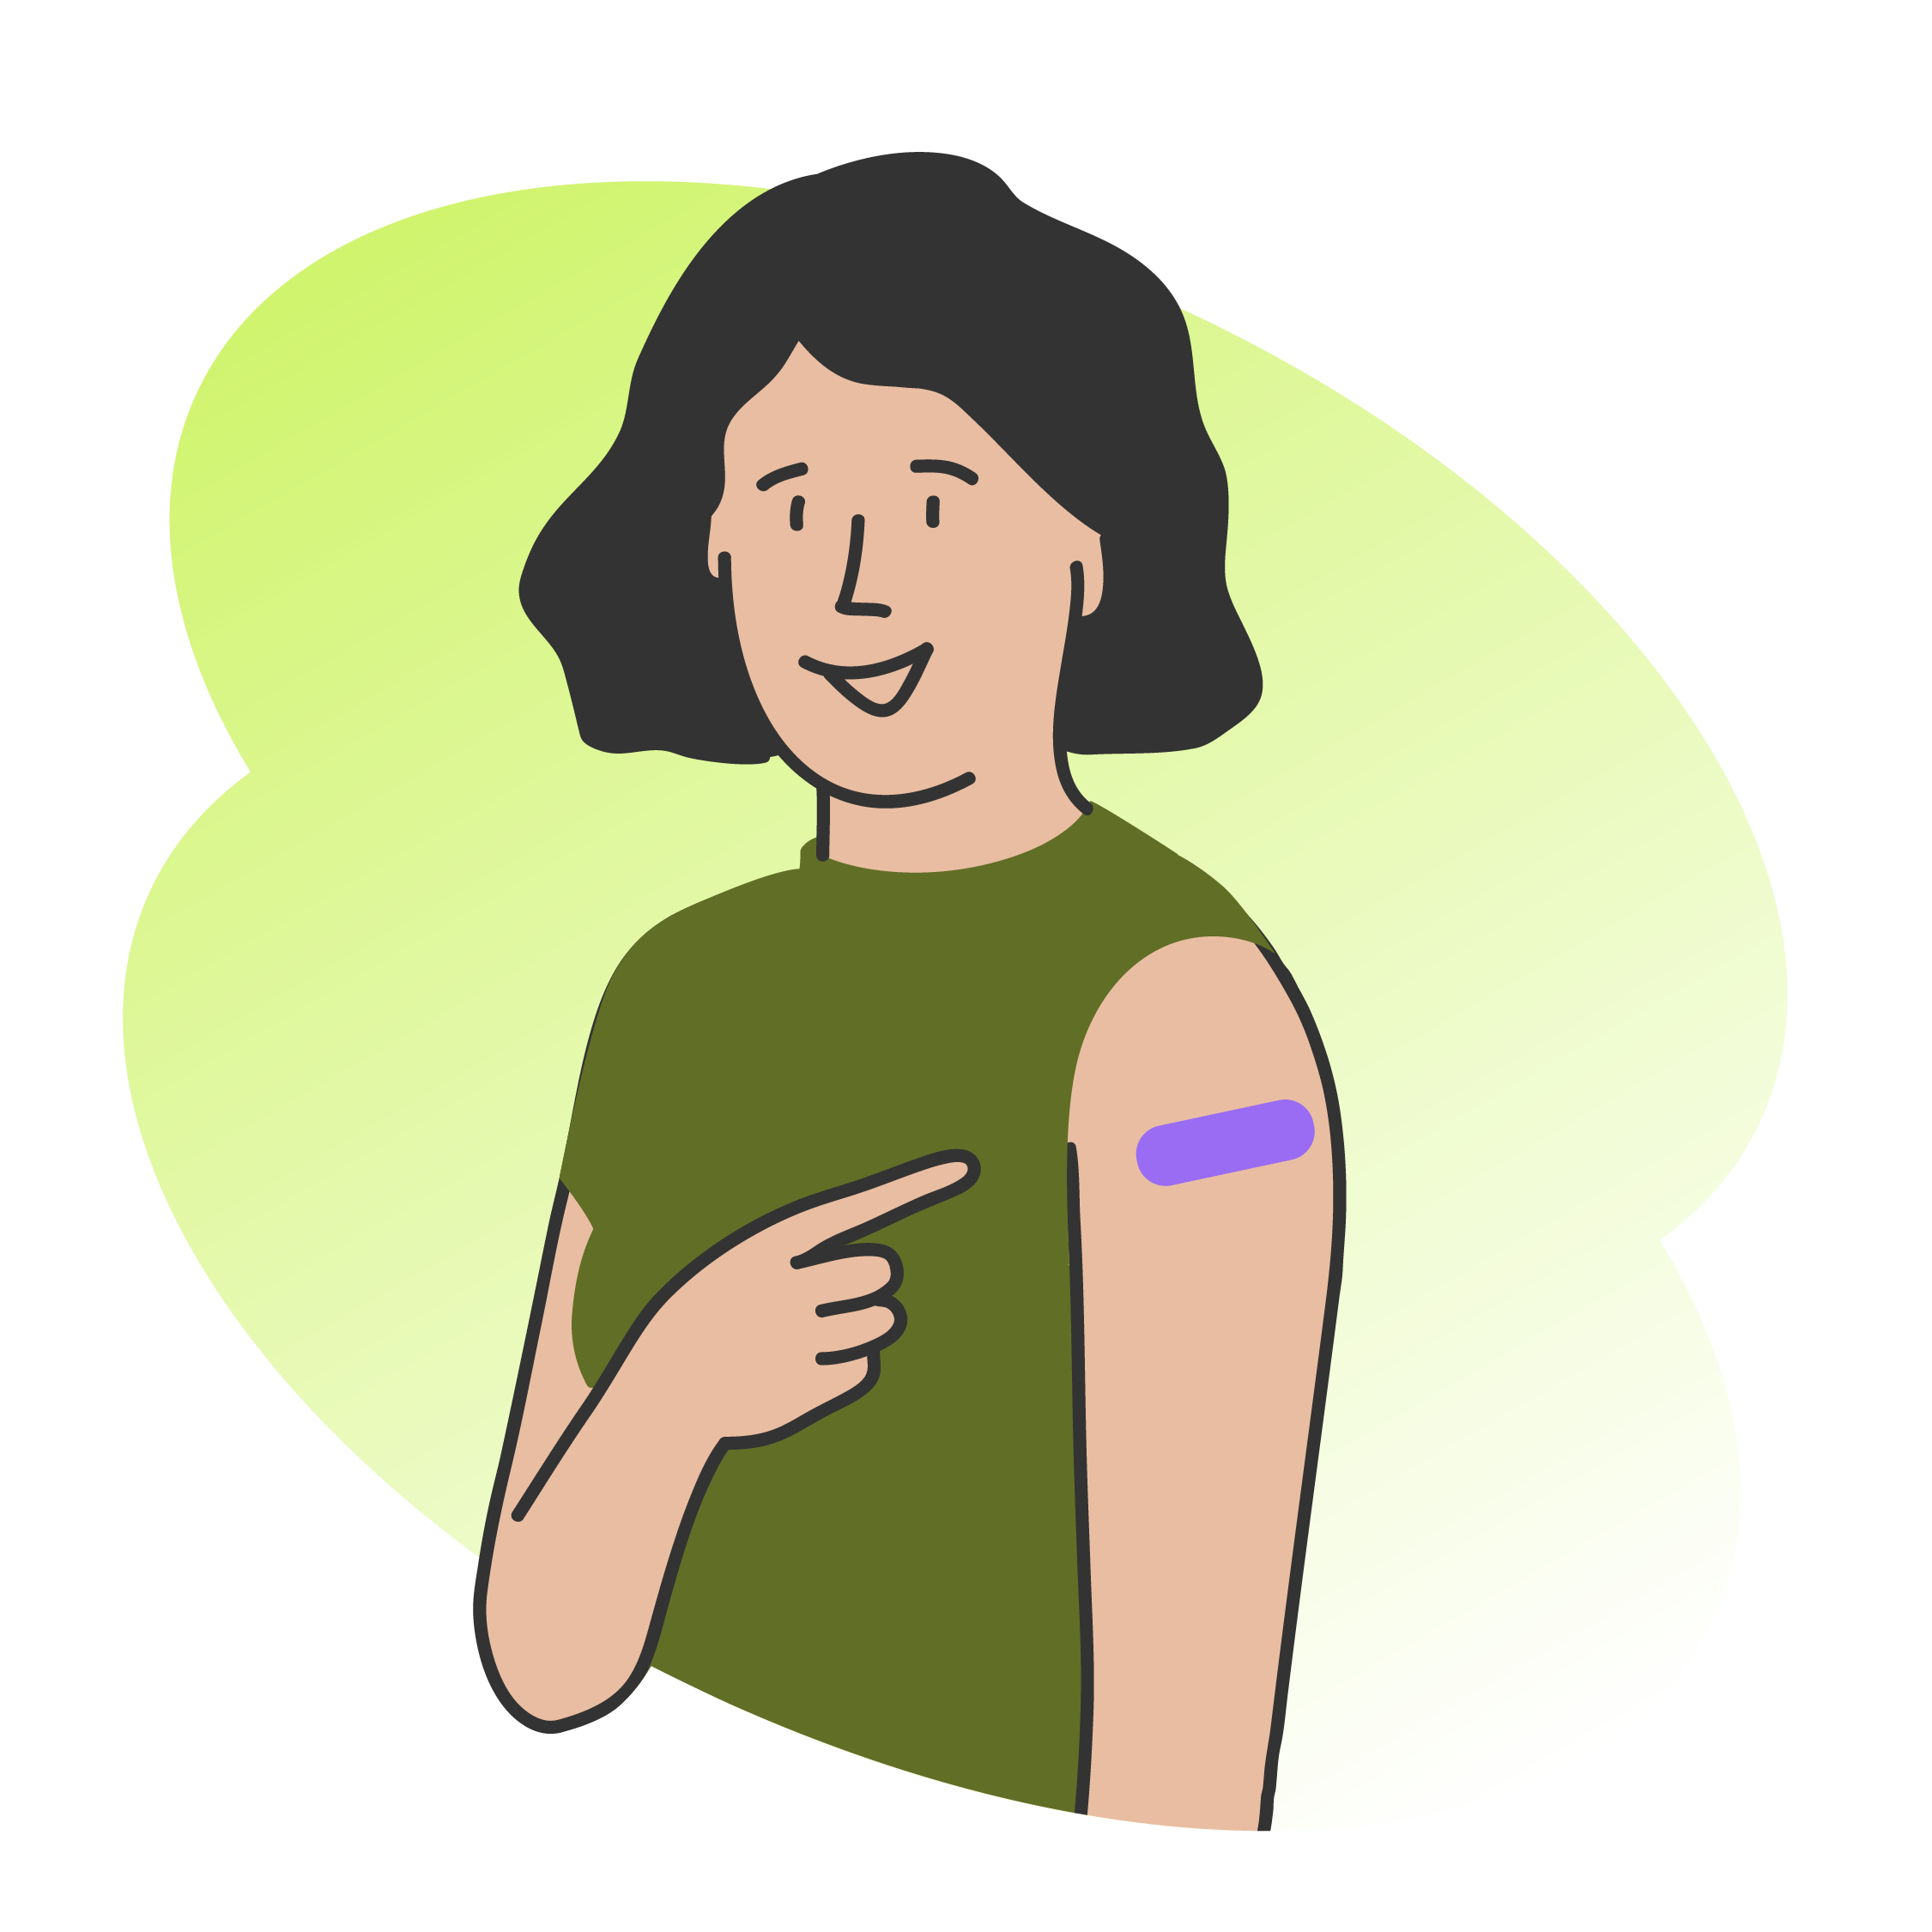 Illustration of person showing a bandage on their arm